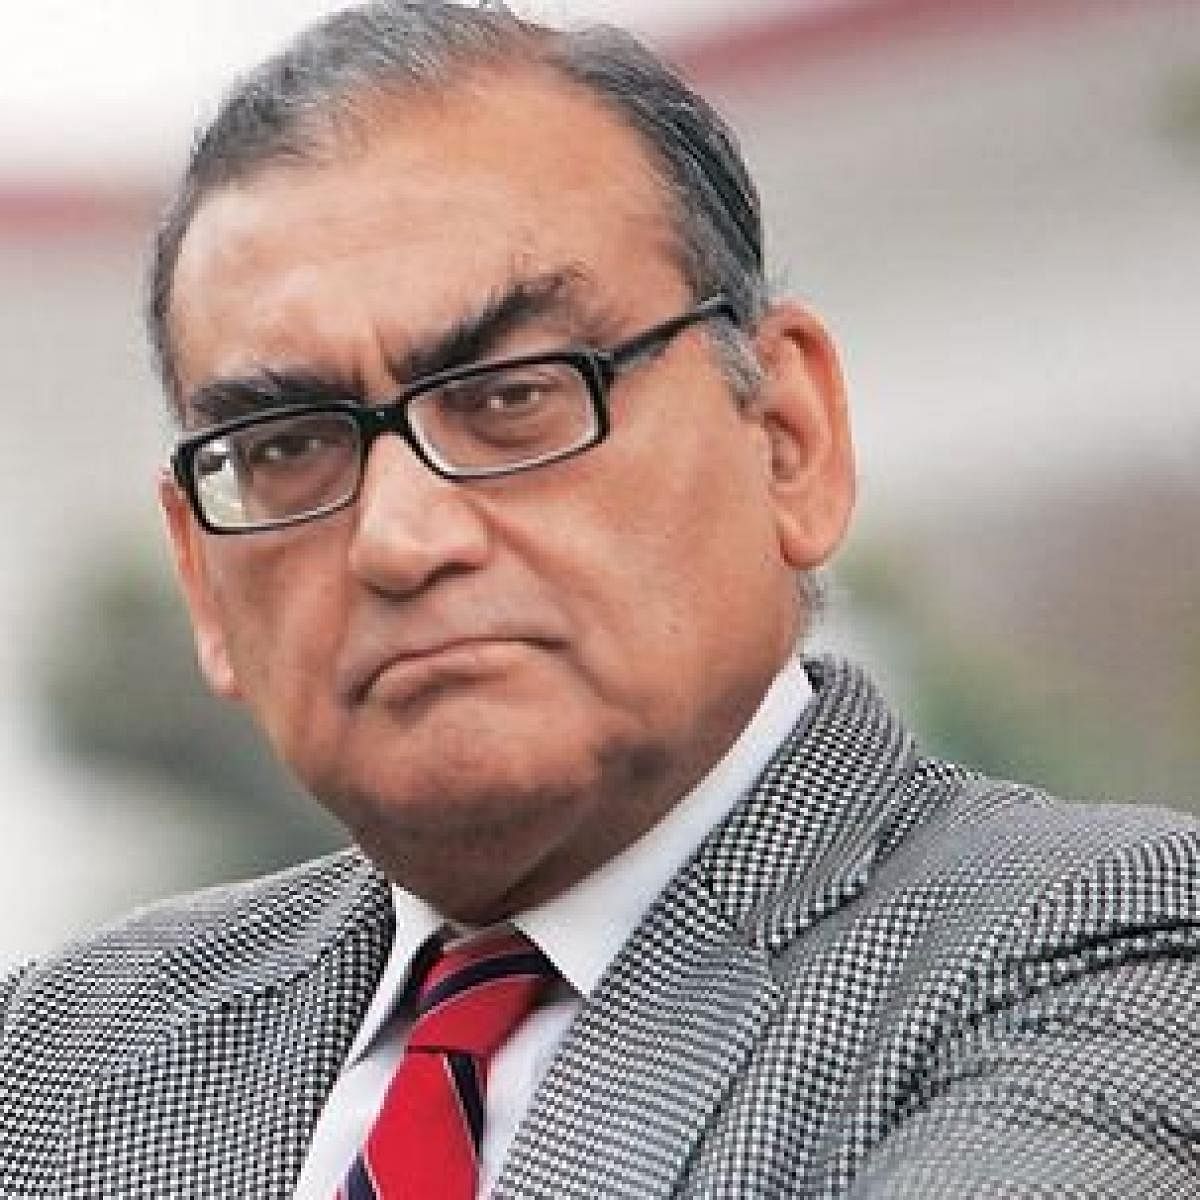 Former Supreme Court judge Markandey Katju says he was on the verge of being impeached when he was in the Allahabad High Court in 1992 after he ordered the reinstatement of a teacher whose appointment was cancelled by school authorities in Uttar Pradesh.